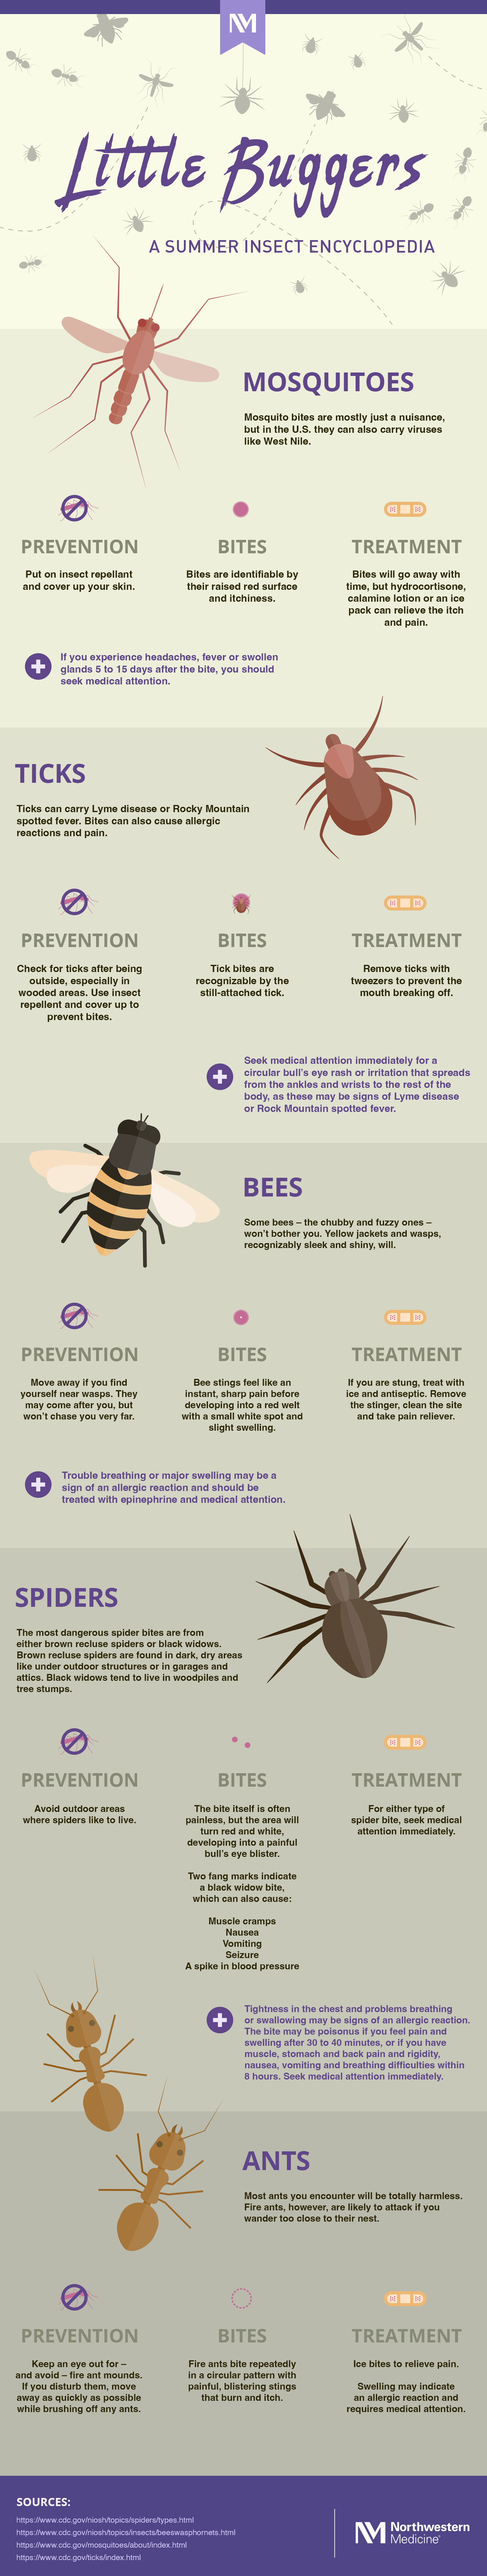 Infographic with title Little Buggers: A Summer Insect Encyclopedia, and subheadings for Mosquitoes, Ticks, Bees, and Spiders with an illustration of the insect and Prevention, Bites and Treatment information for each.